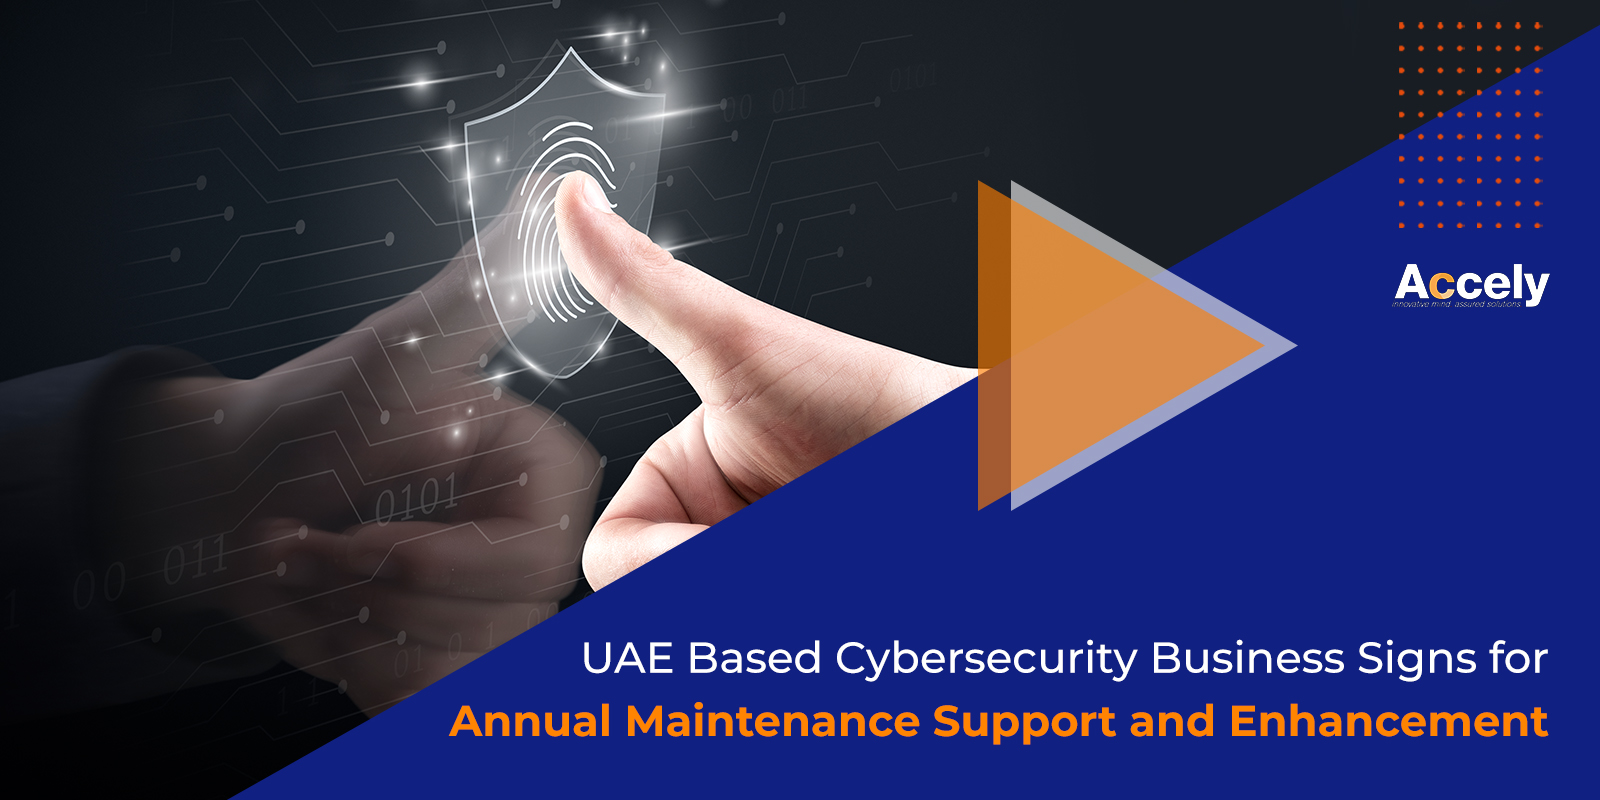 UAE Based Cybersecurity Business Signs for Annual Maintenance Support and Enhancement